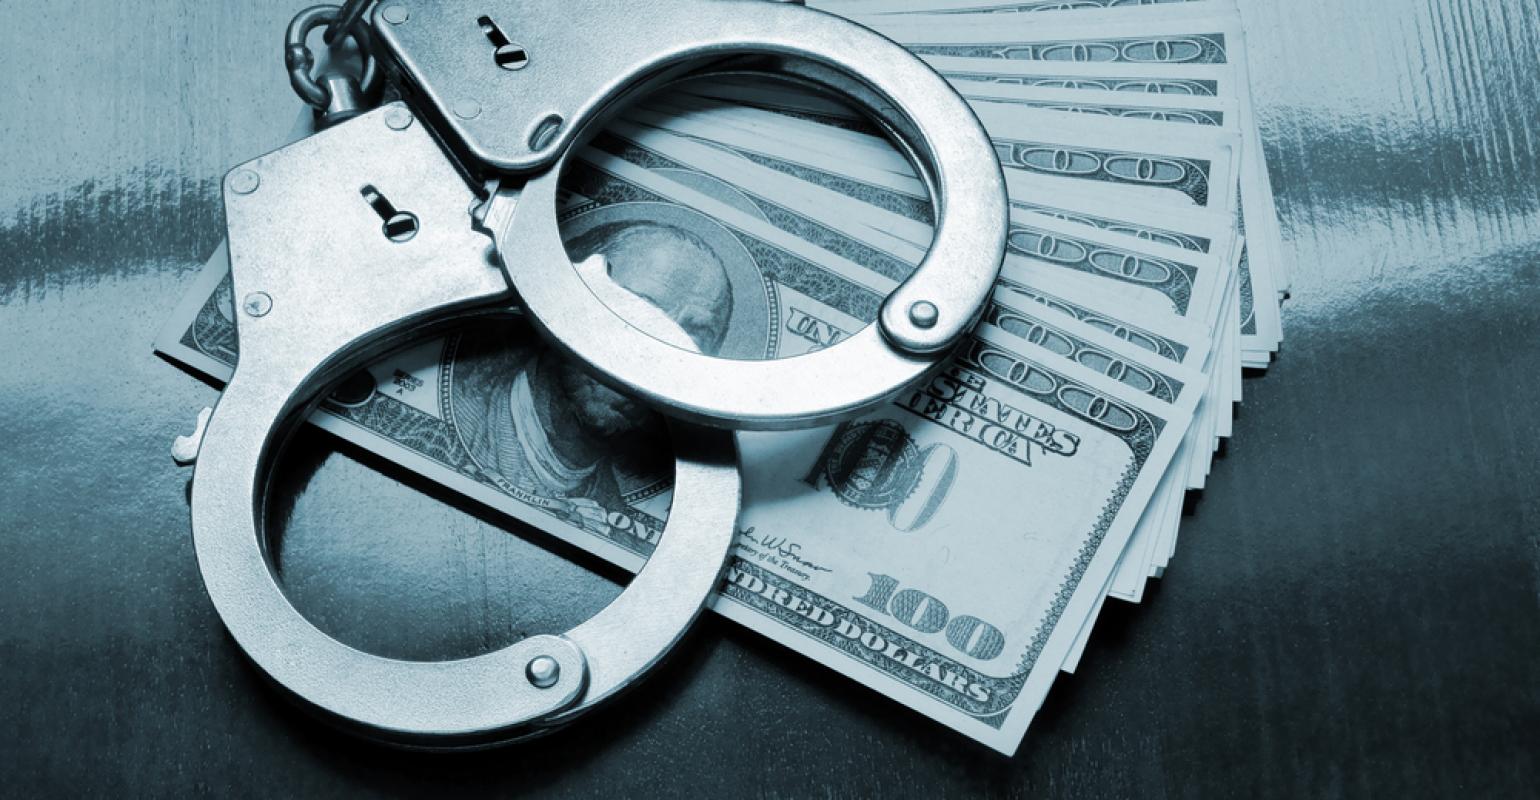 Fraud case attracts whopping $1M in fines